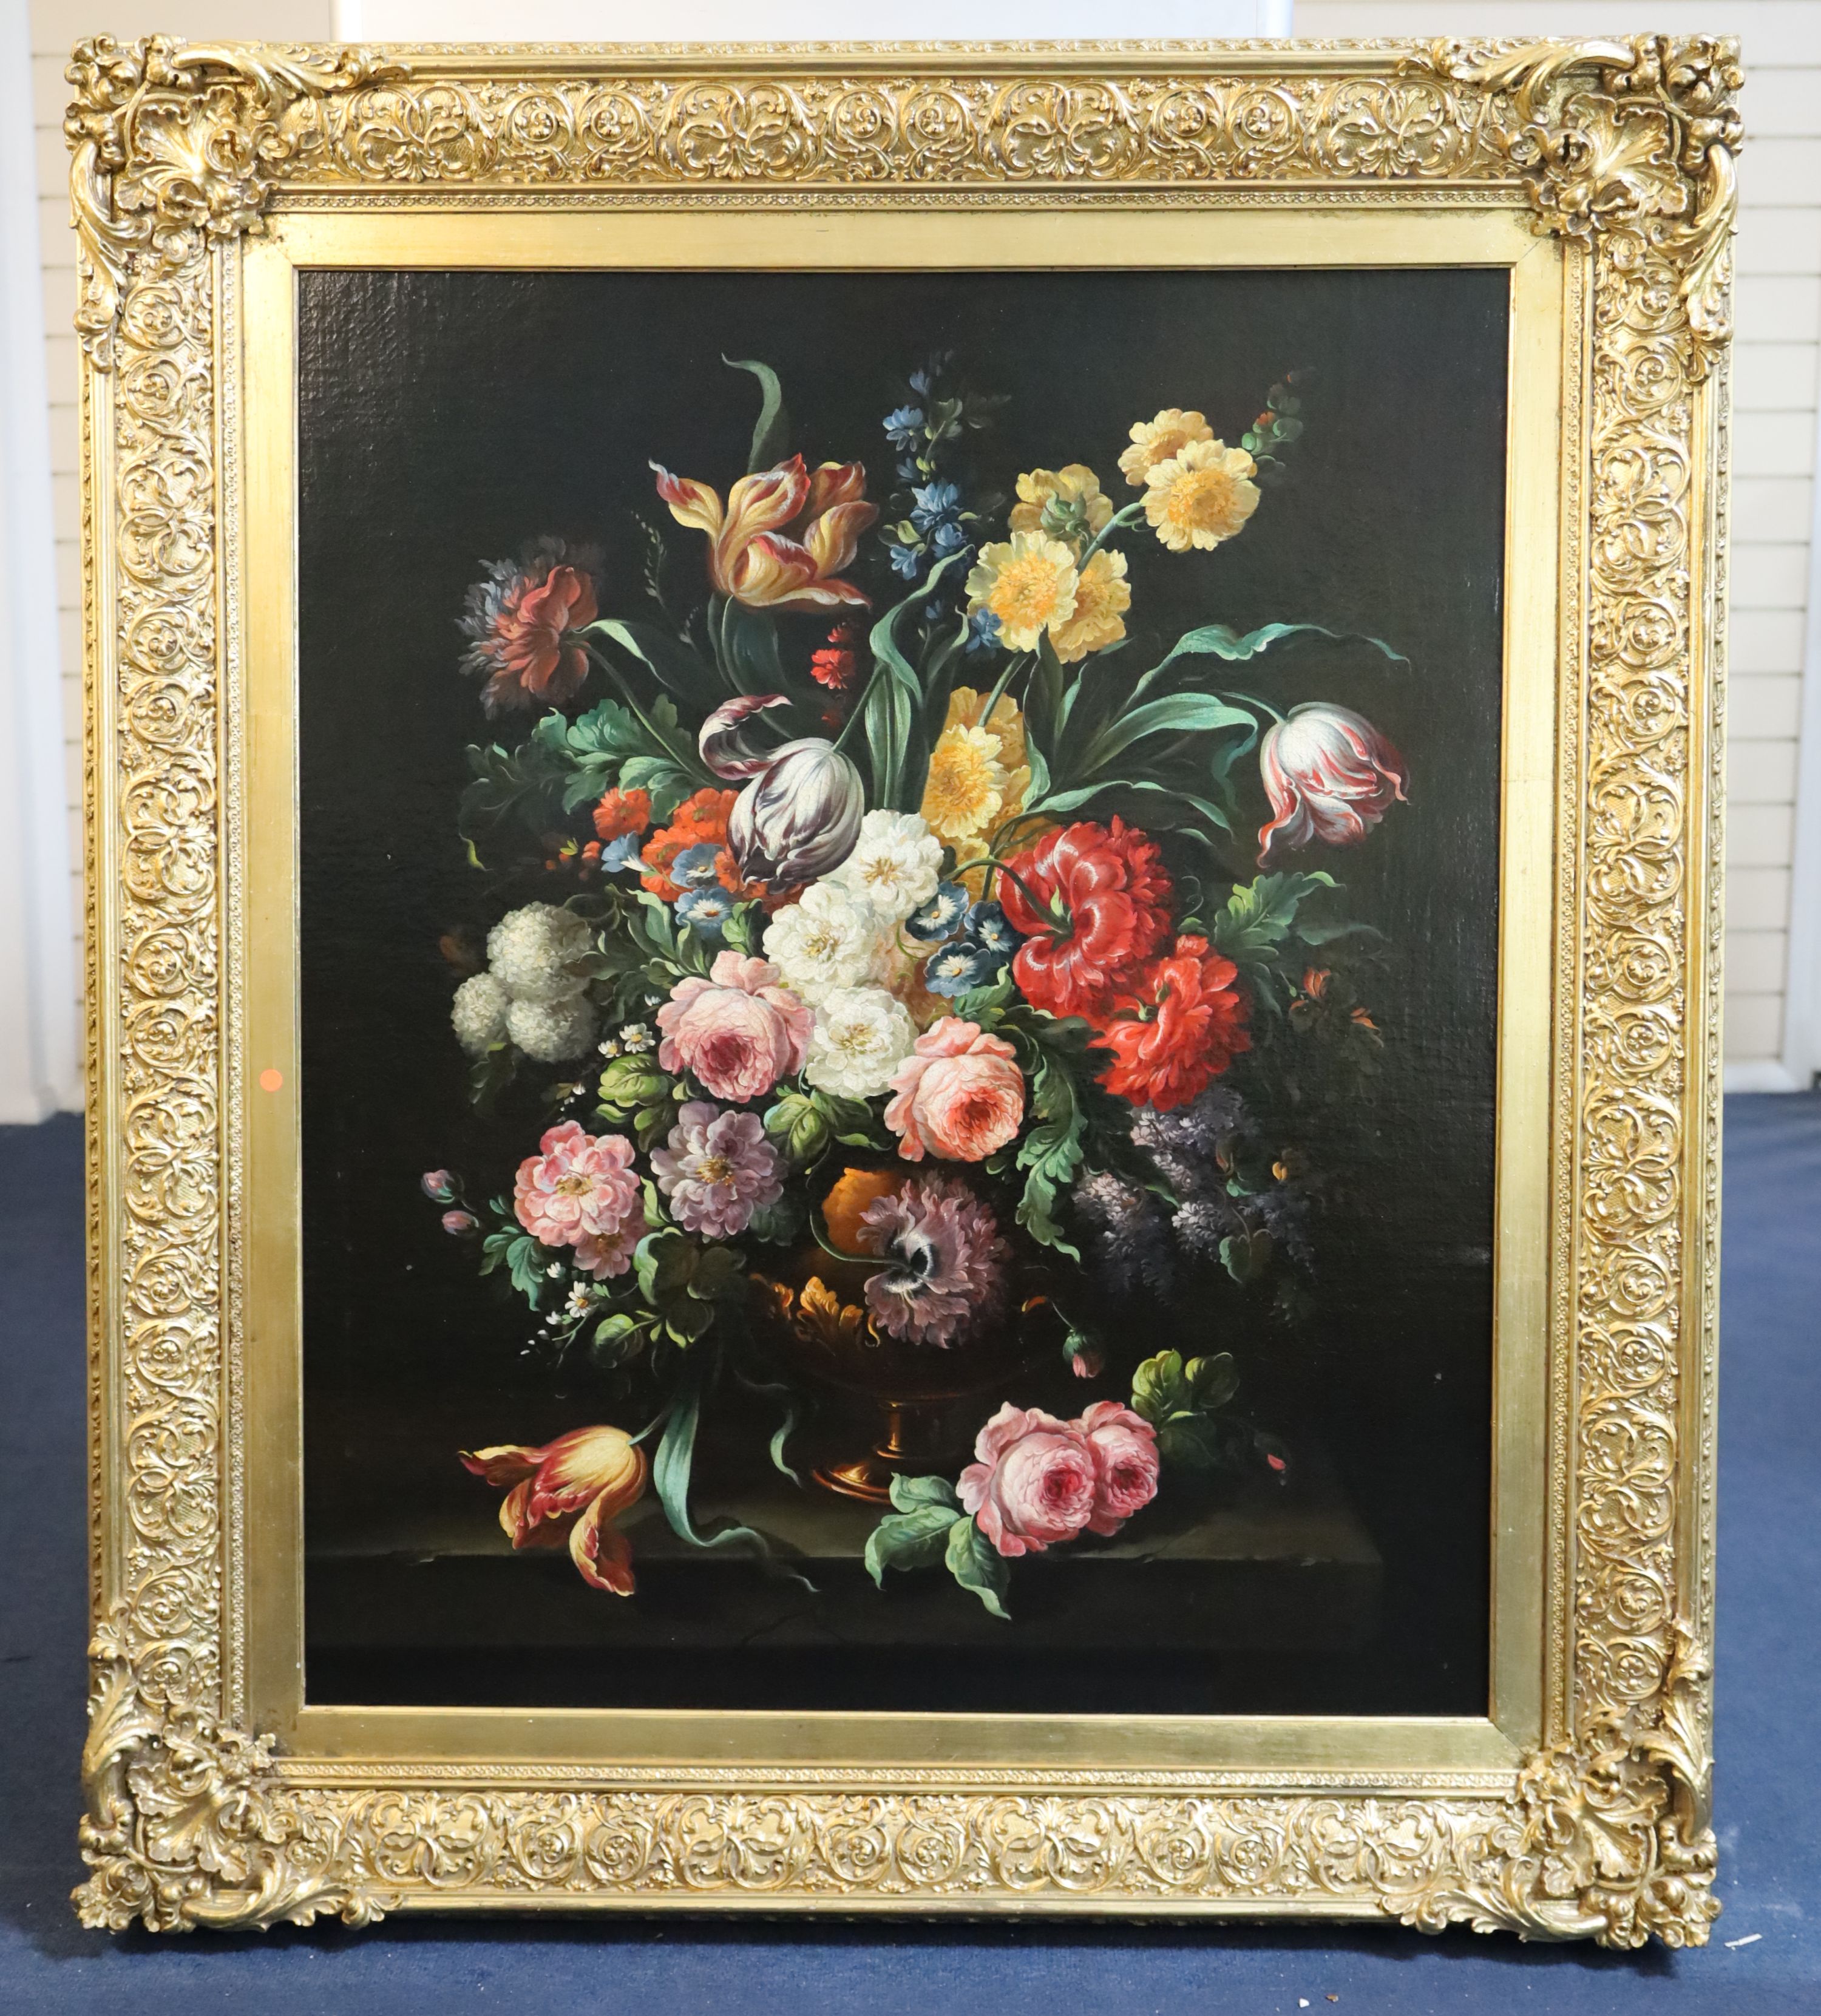 17th century Dutch style Still life of flowers in a vase upon a ledge 35 x 29in.